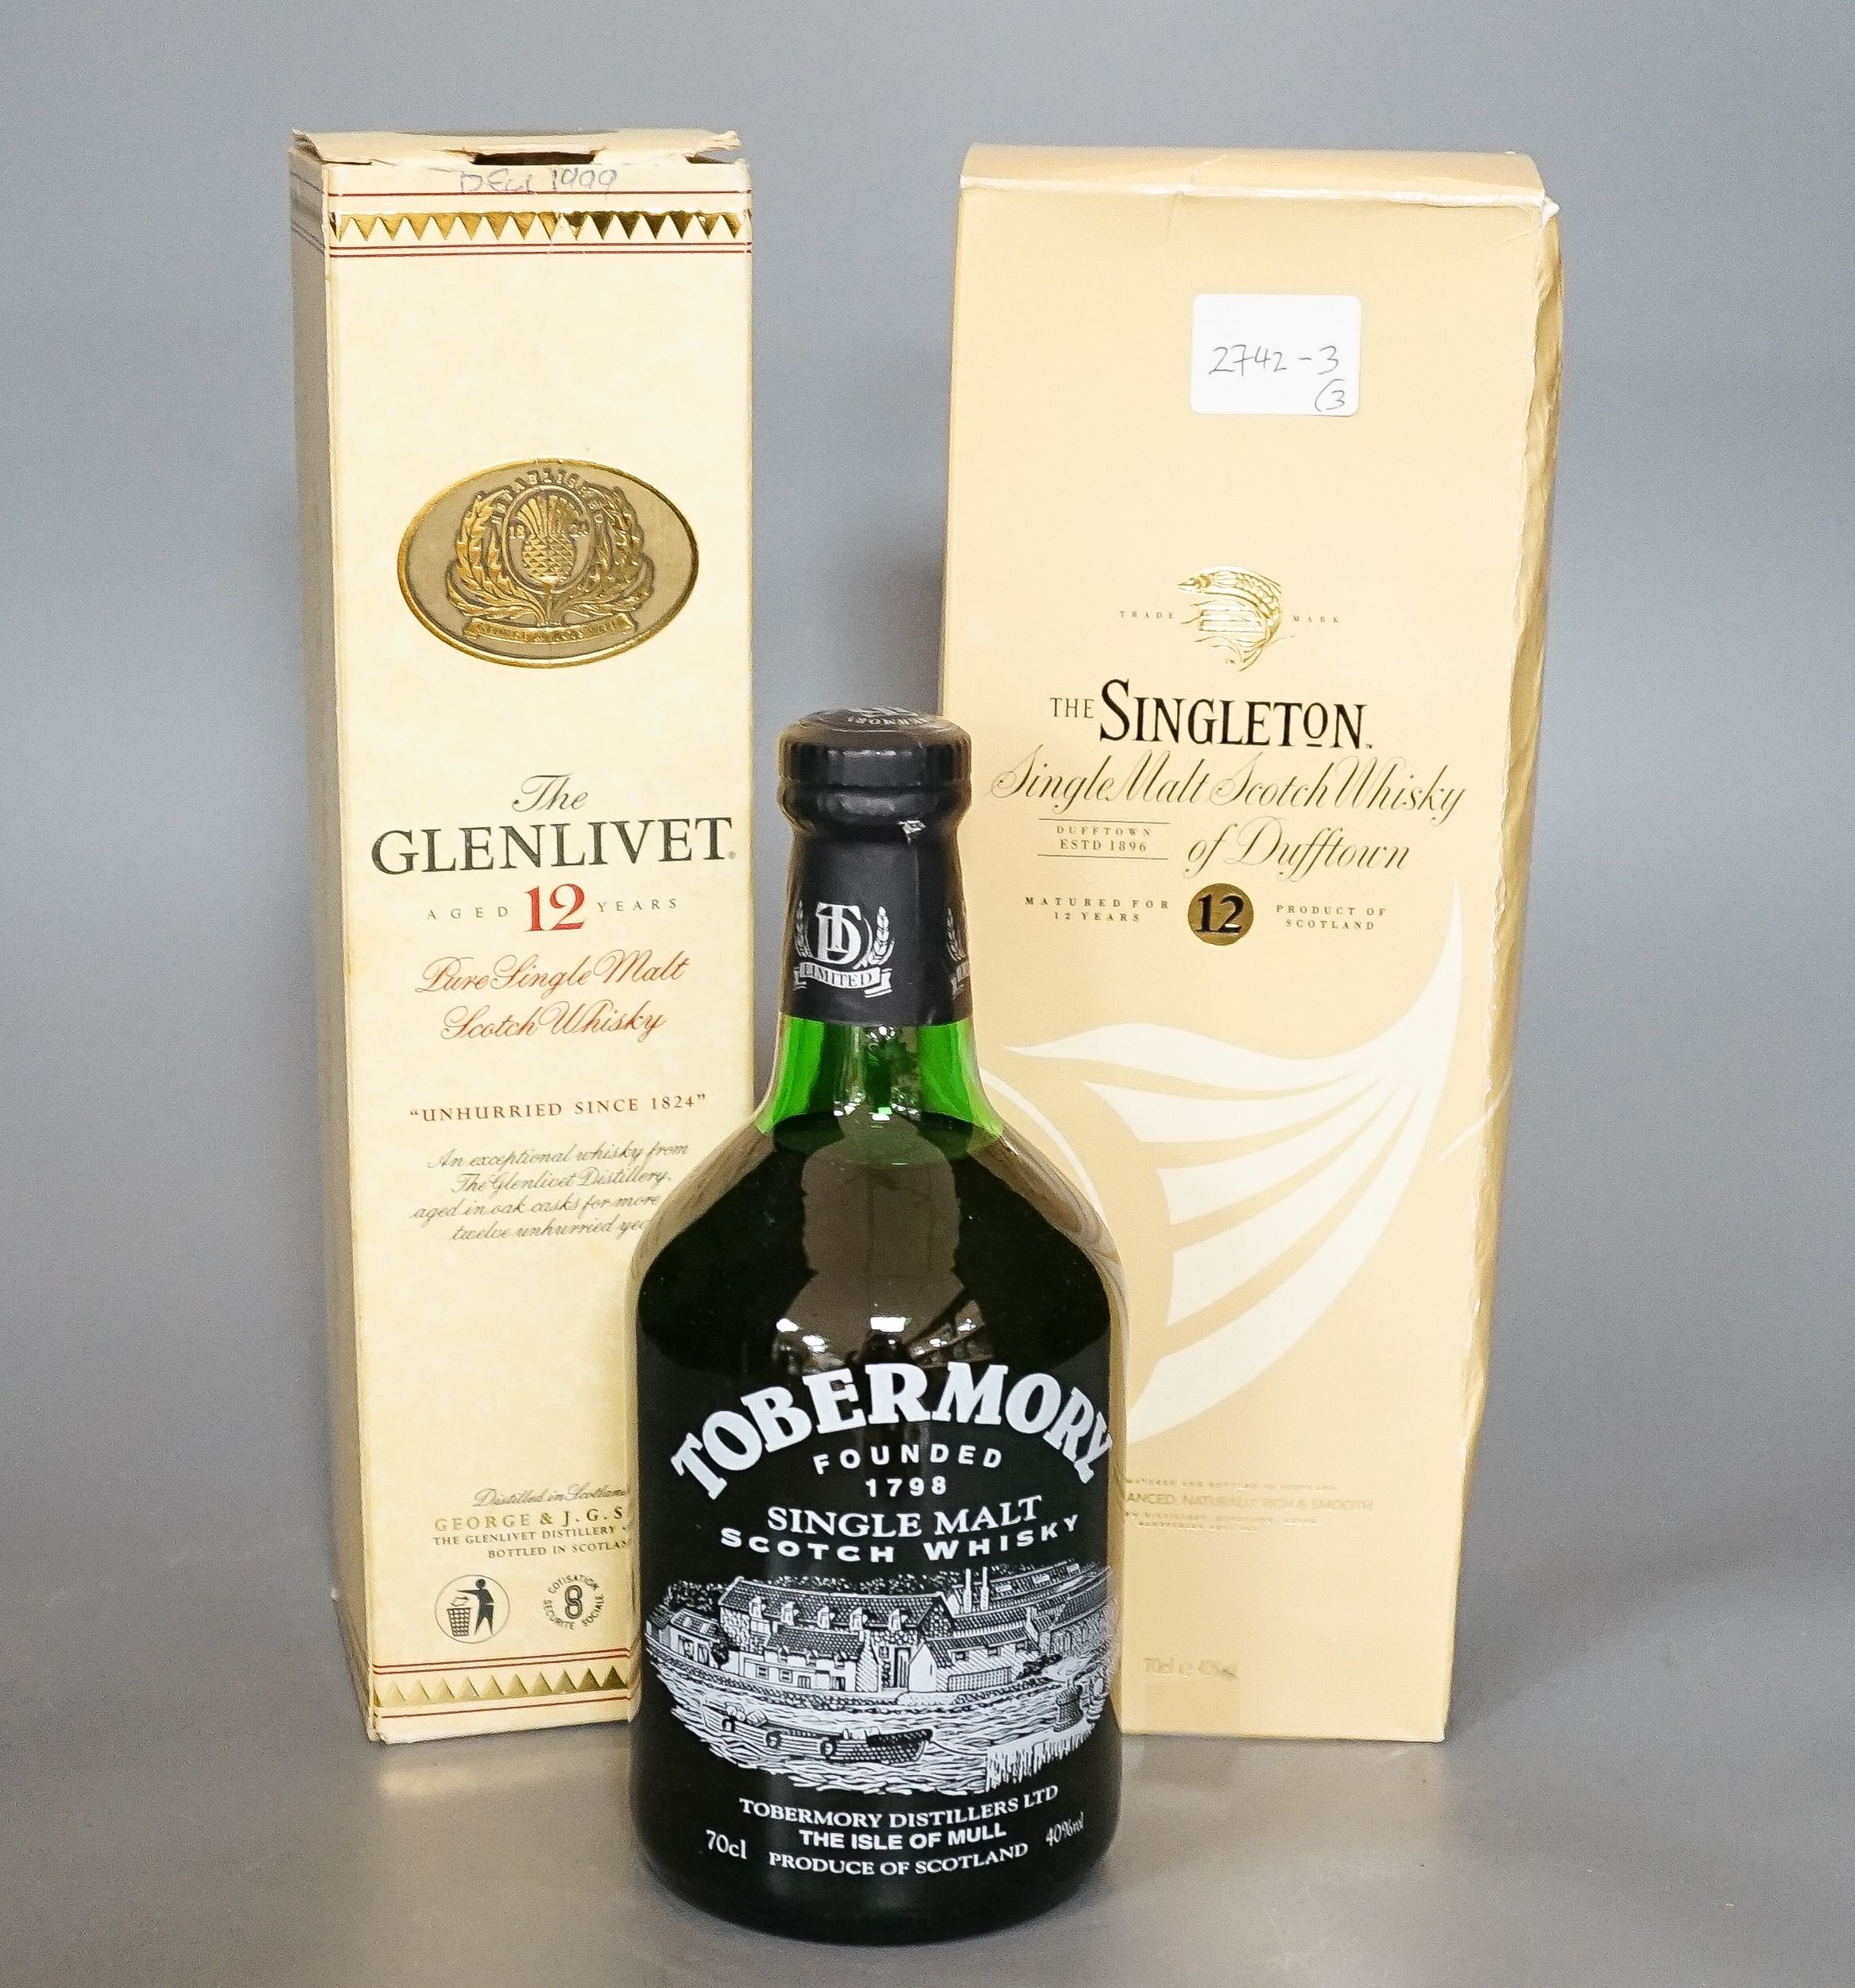 Three bottles of single malt whisky - The Singleton of Dufftown aged 12 years, Tobermory and The Glenlivet aged 12 years (3)